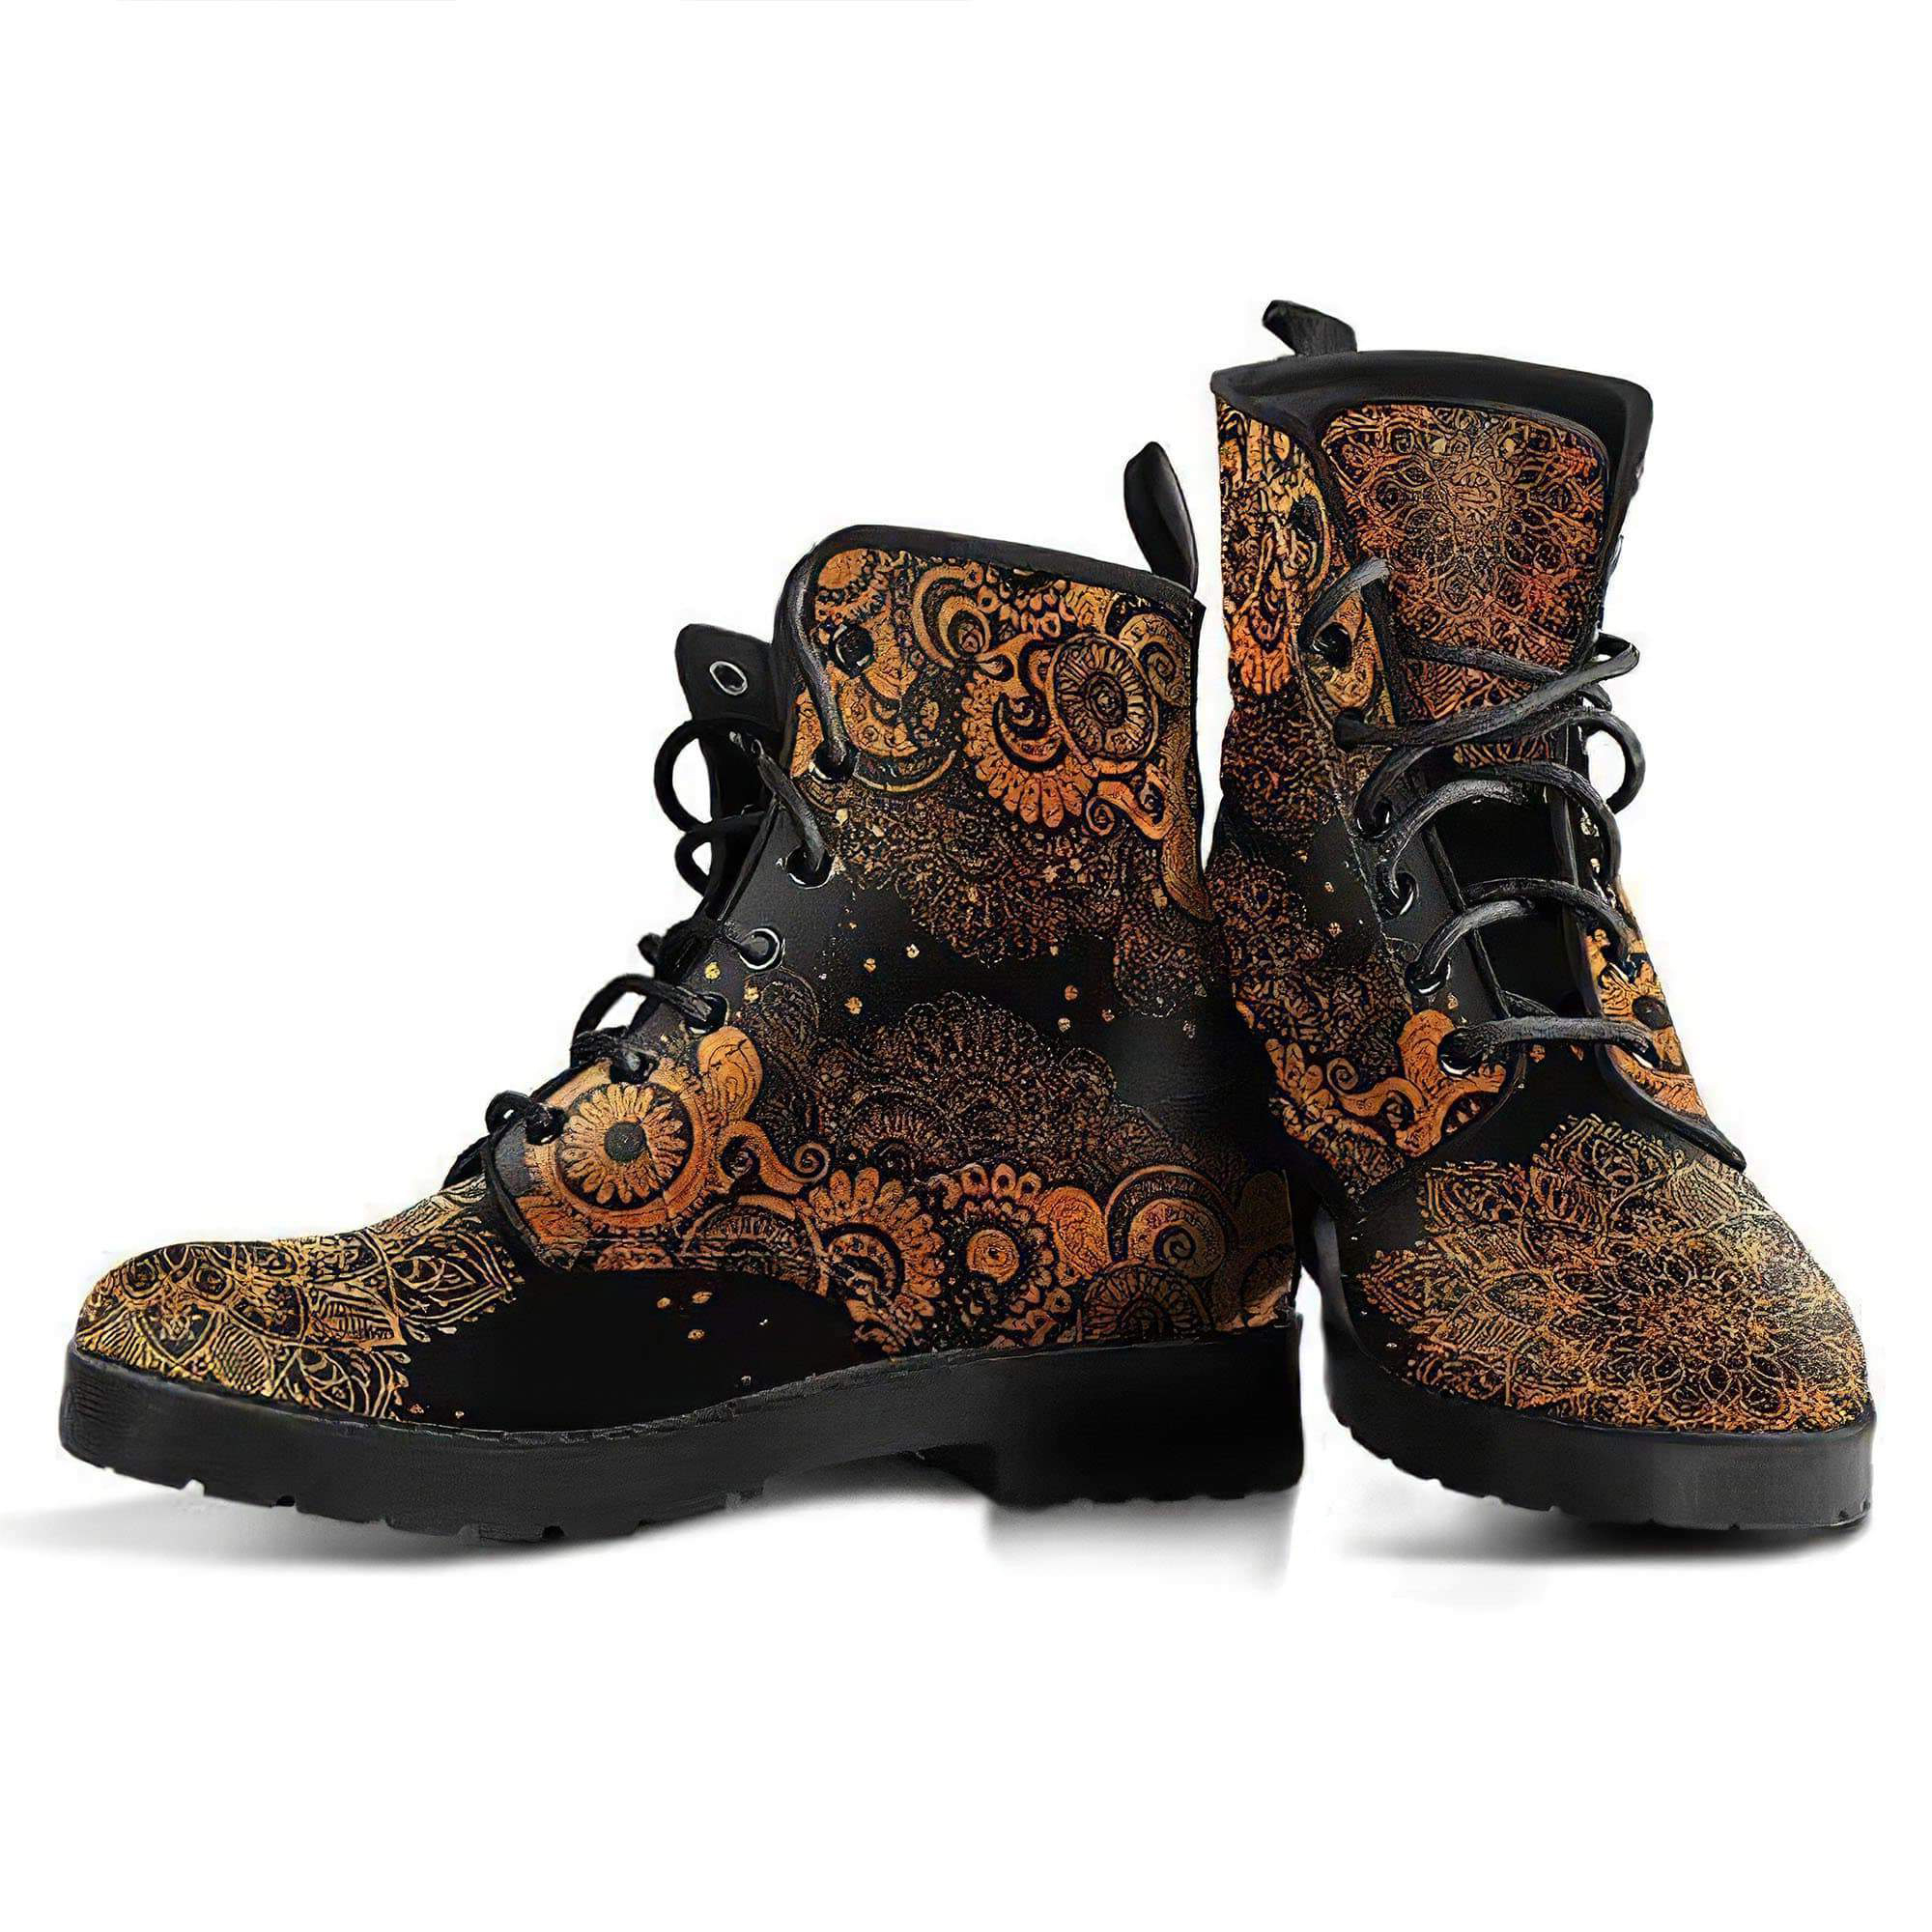 rusty-gold-paisley-mandala-handcrafted-boots-women-s-leather-boots-12051946668093.jpg